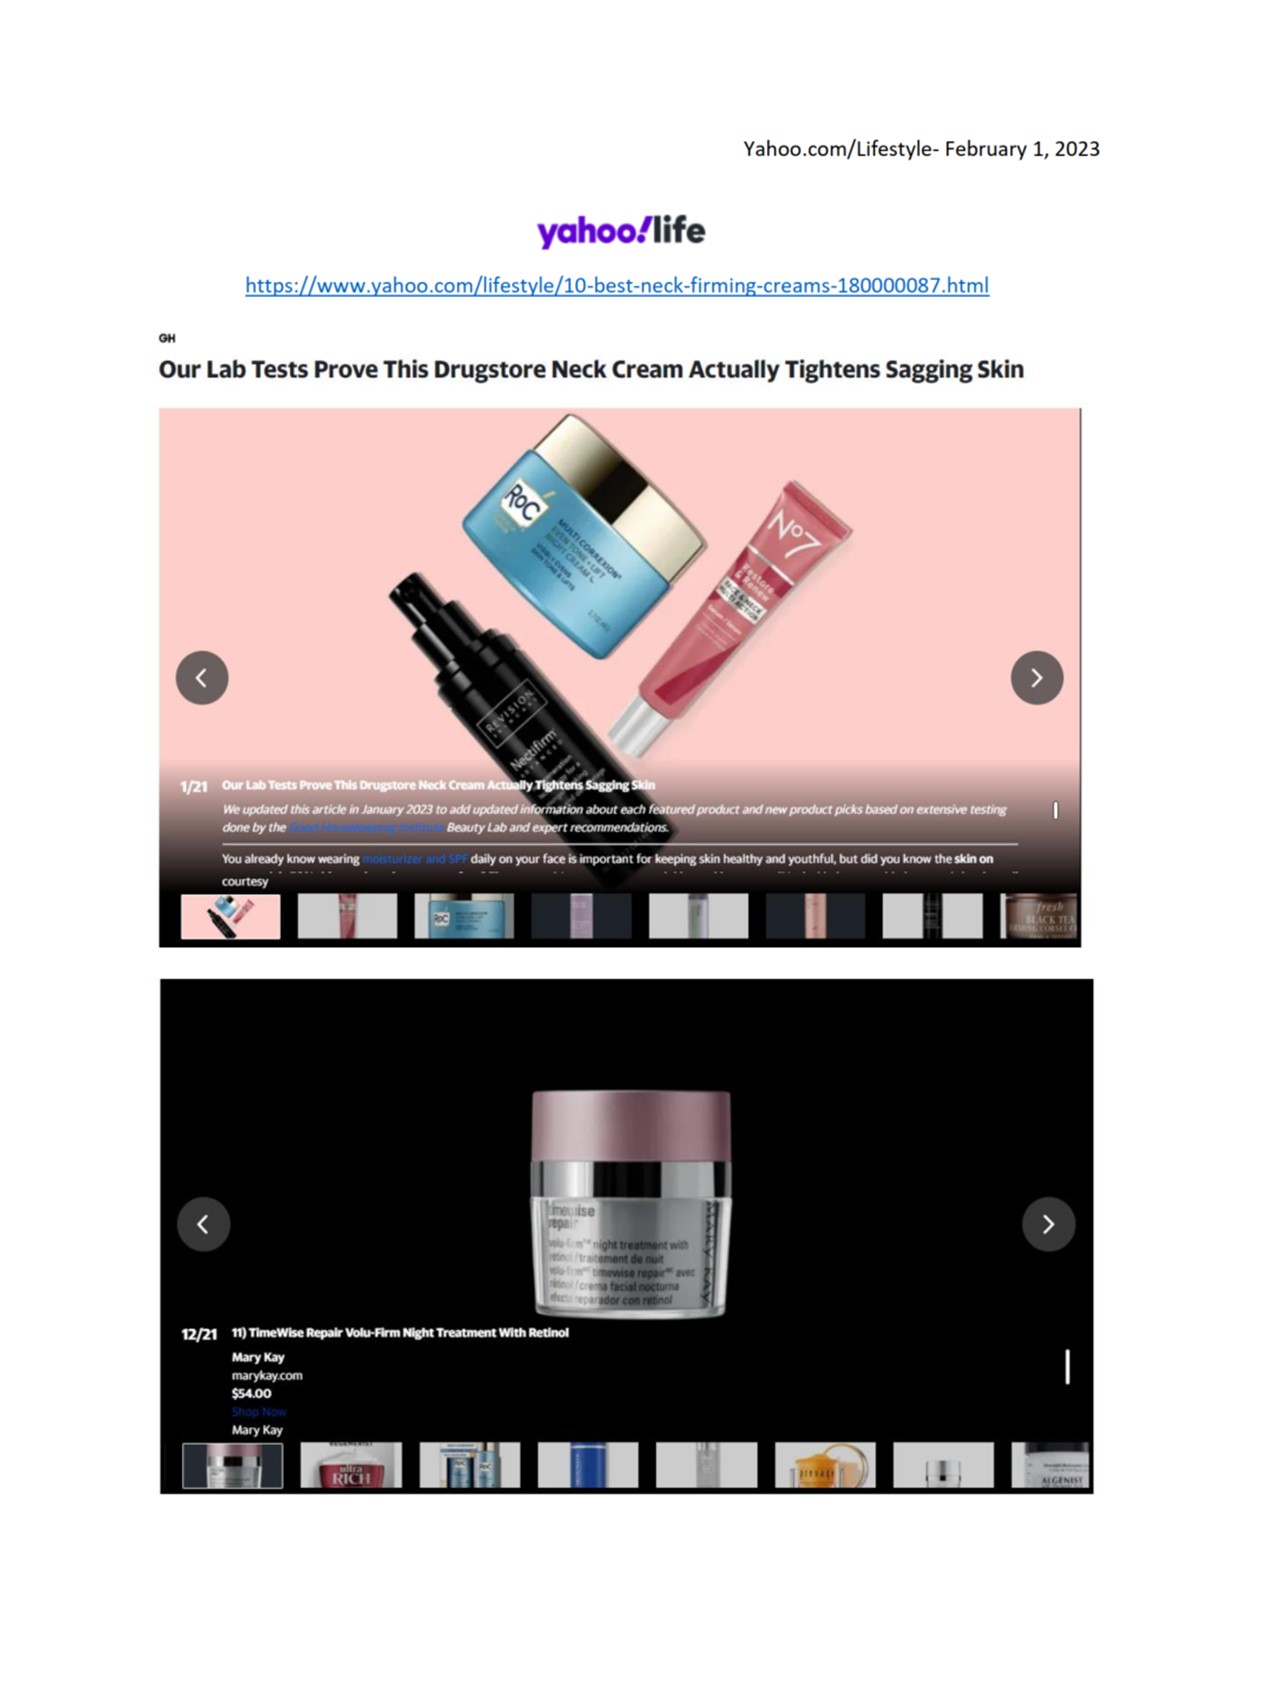 https://www.marykay.com/-/media/images/mk/united-states/usa/esuite/tips-and-trends/mk-mentions/beauty-editor-picks/2023/02/yahoocomlifestyle-february-1-2023.jpg?h=1707&w=1280&la=en-US&hash=DF49D5C8ACC714483B5B09BF23C00E26CDCADDE6